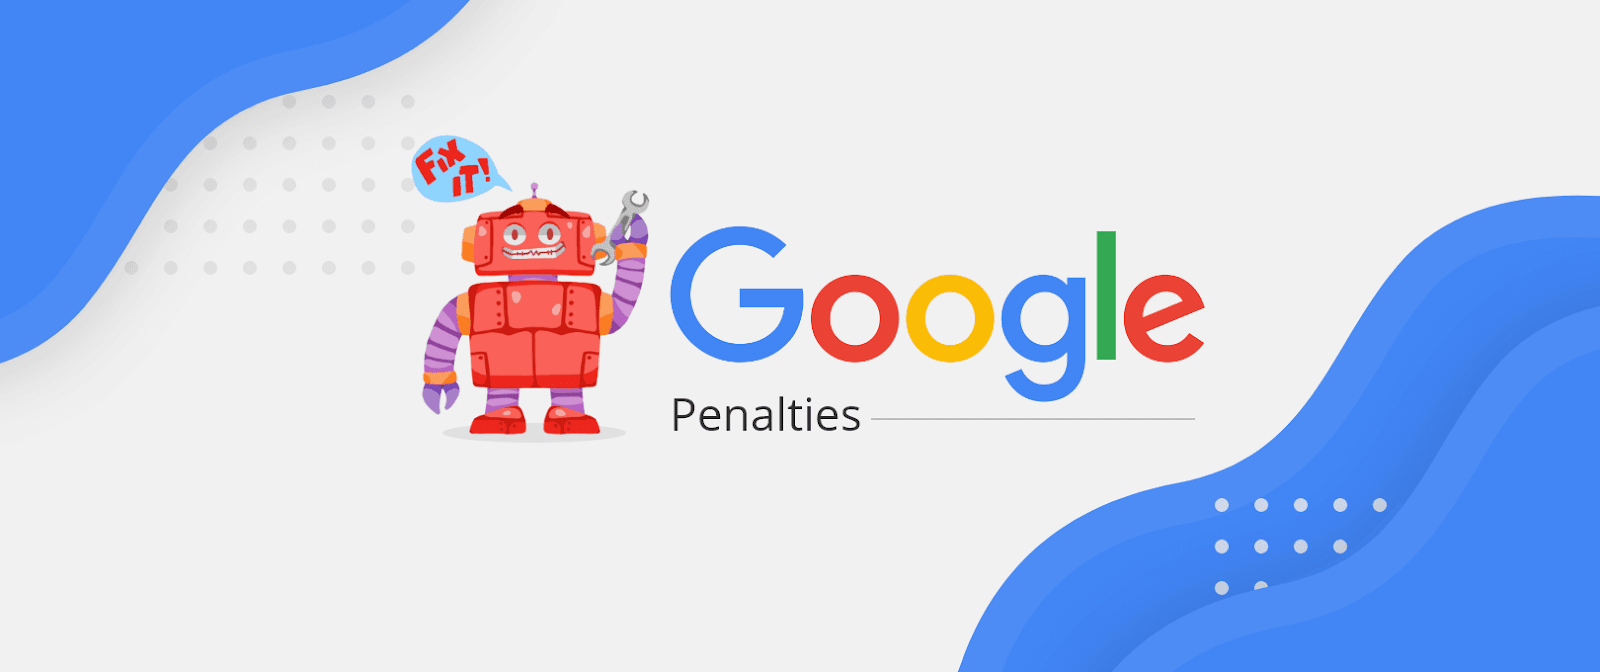 7 Crucial Google Penalties and How to Avoid Them - DevriX